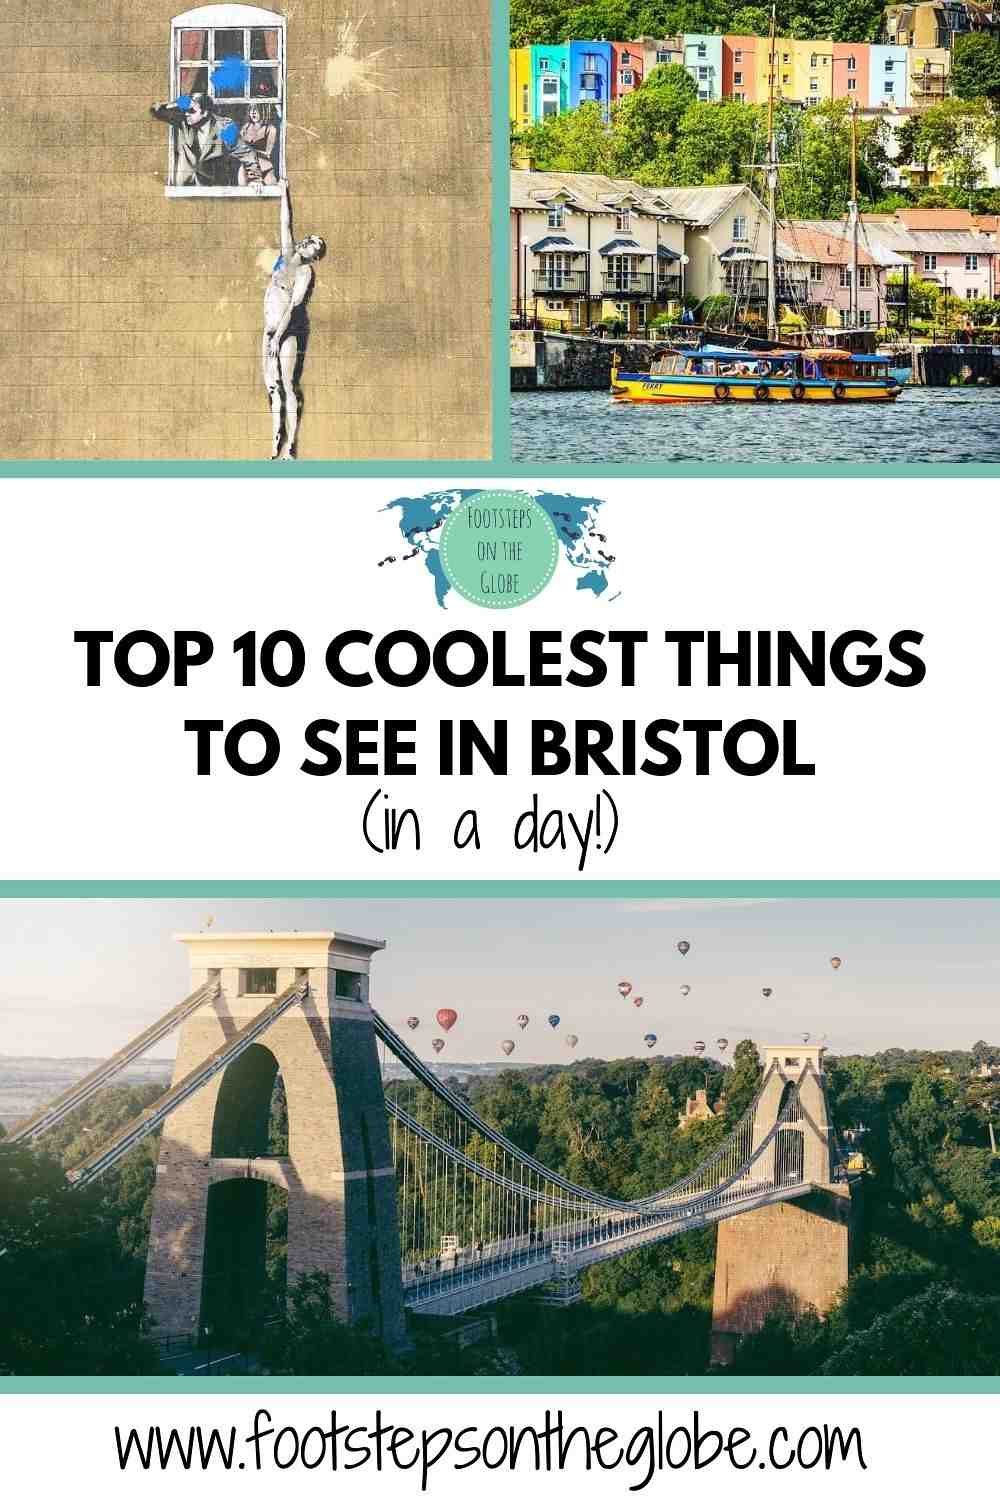 Pinterest image of Banky's street art, the Bristol Harbour and Clifton Suspension Bridge with the text: "Top 10 coolest things to see in Bristol (in a day!)